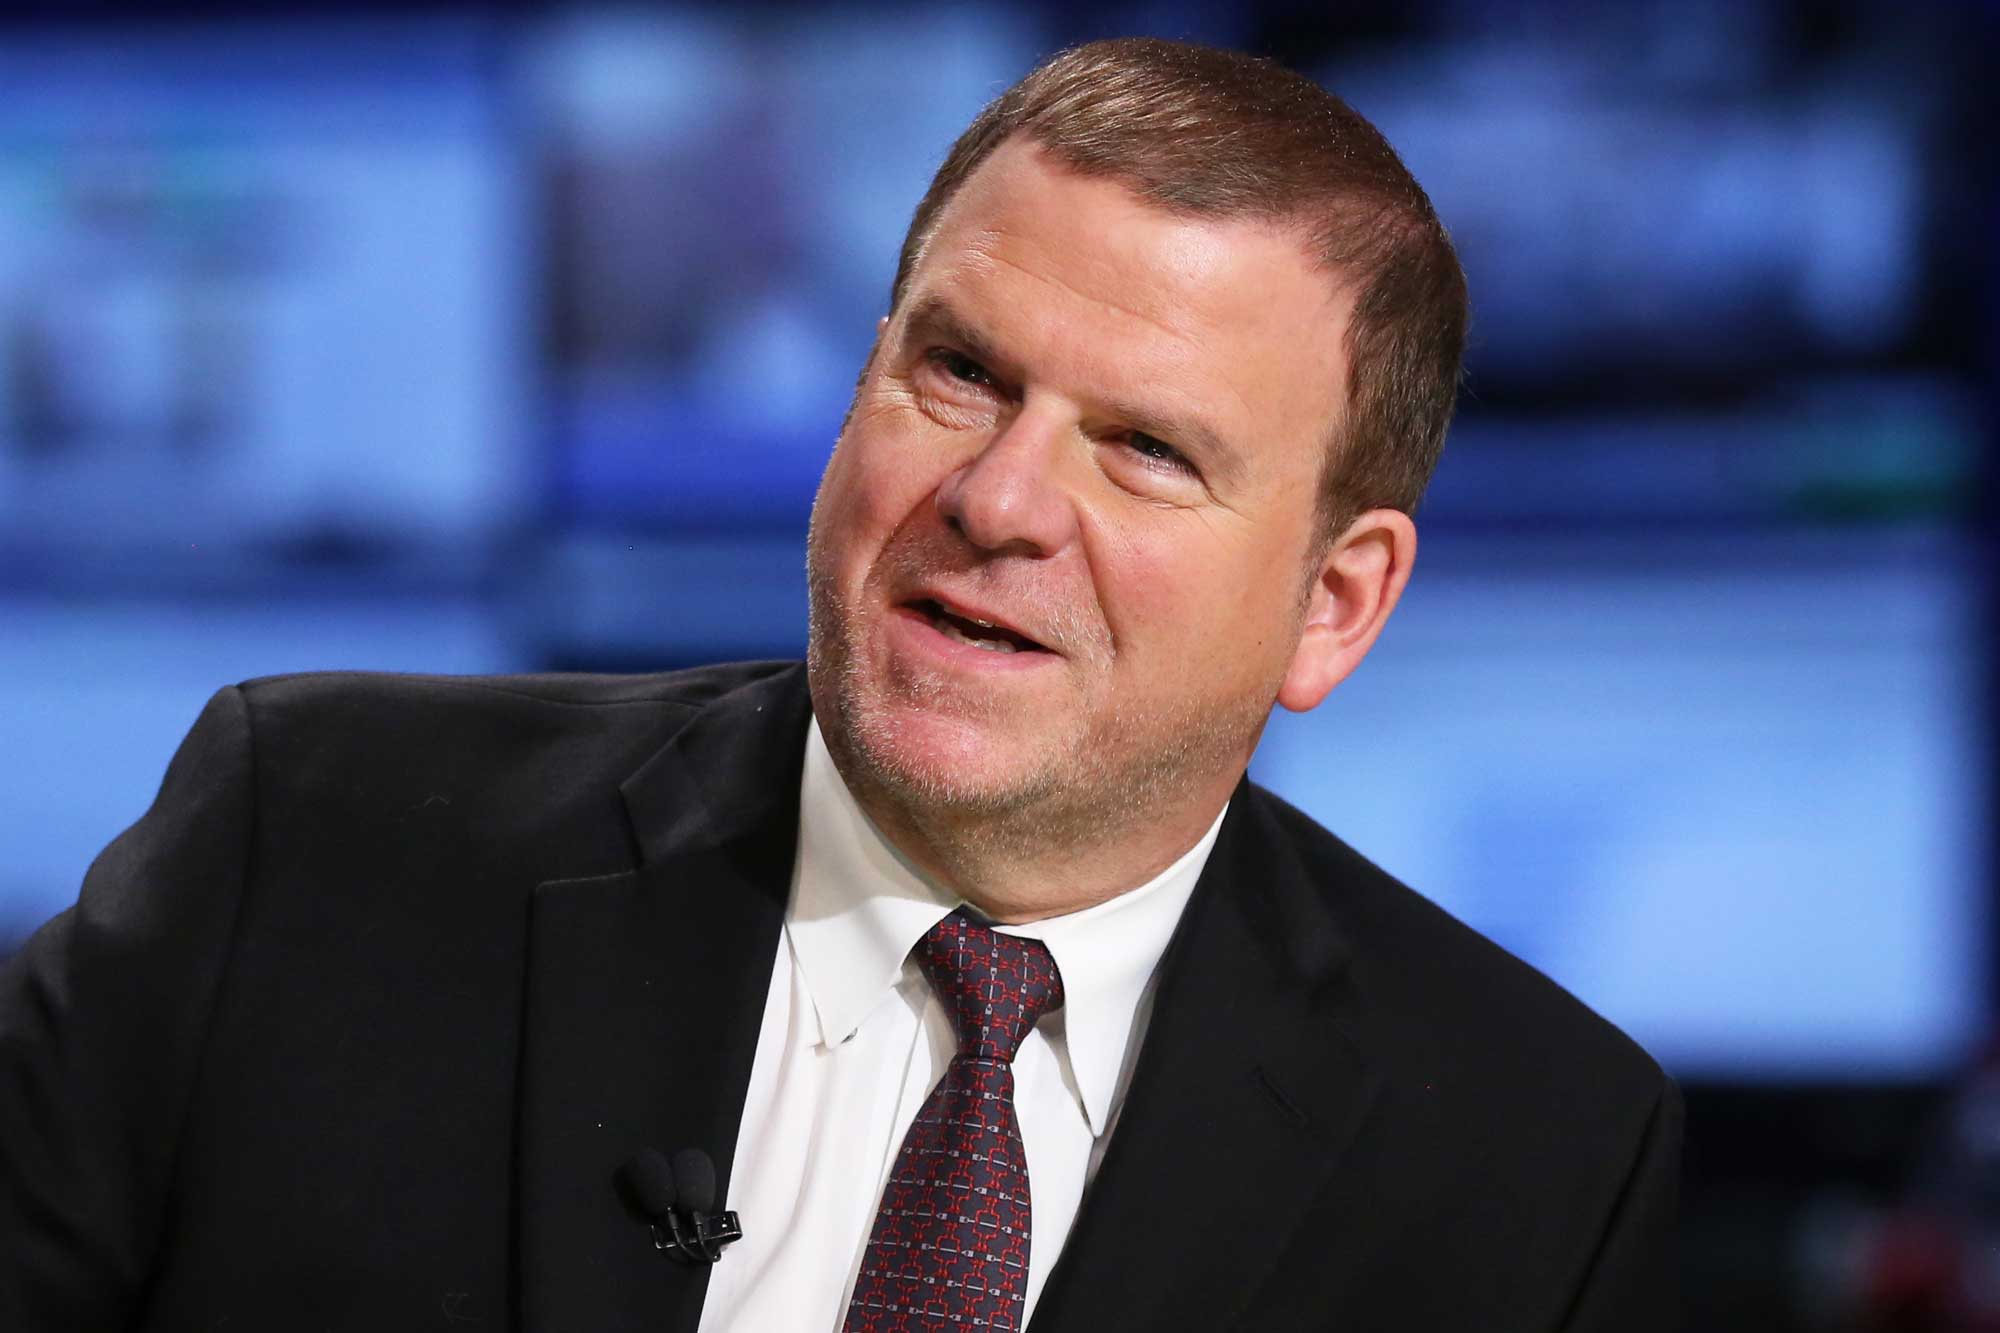 Tilman Fertitta is turning 'very conservative' amid recession fears